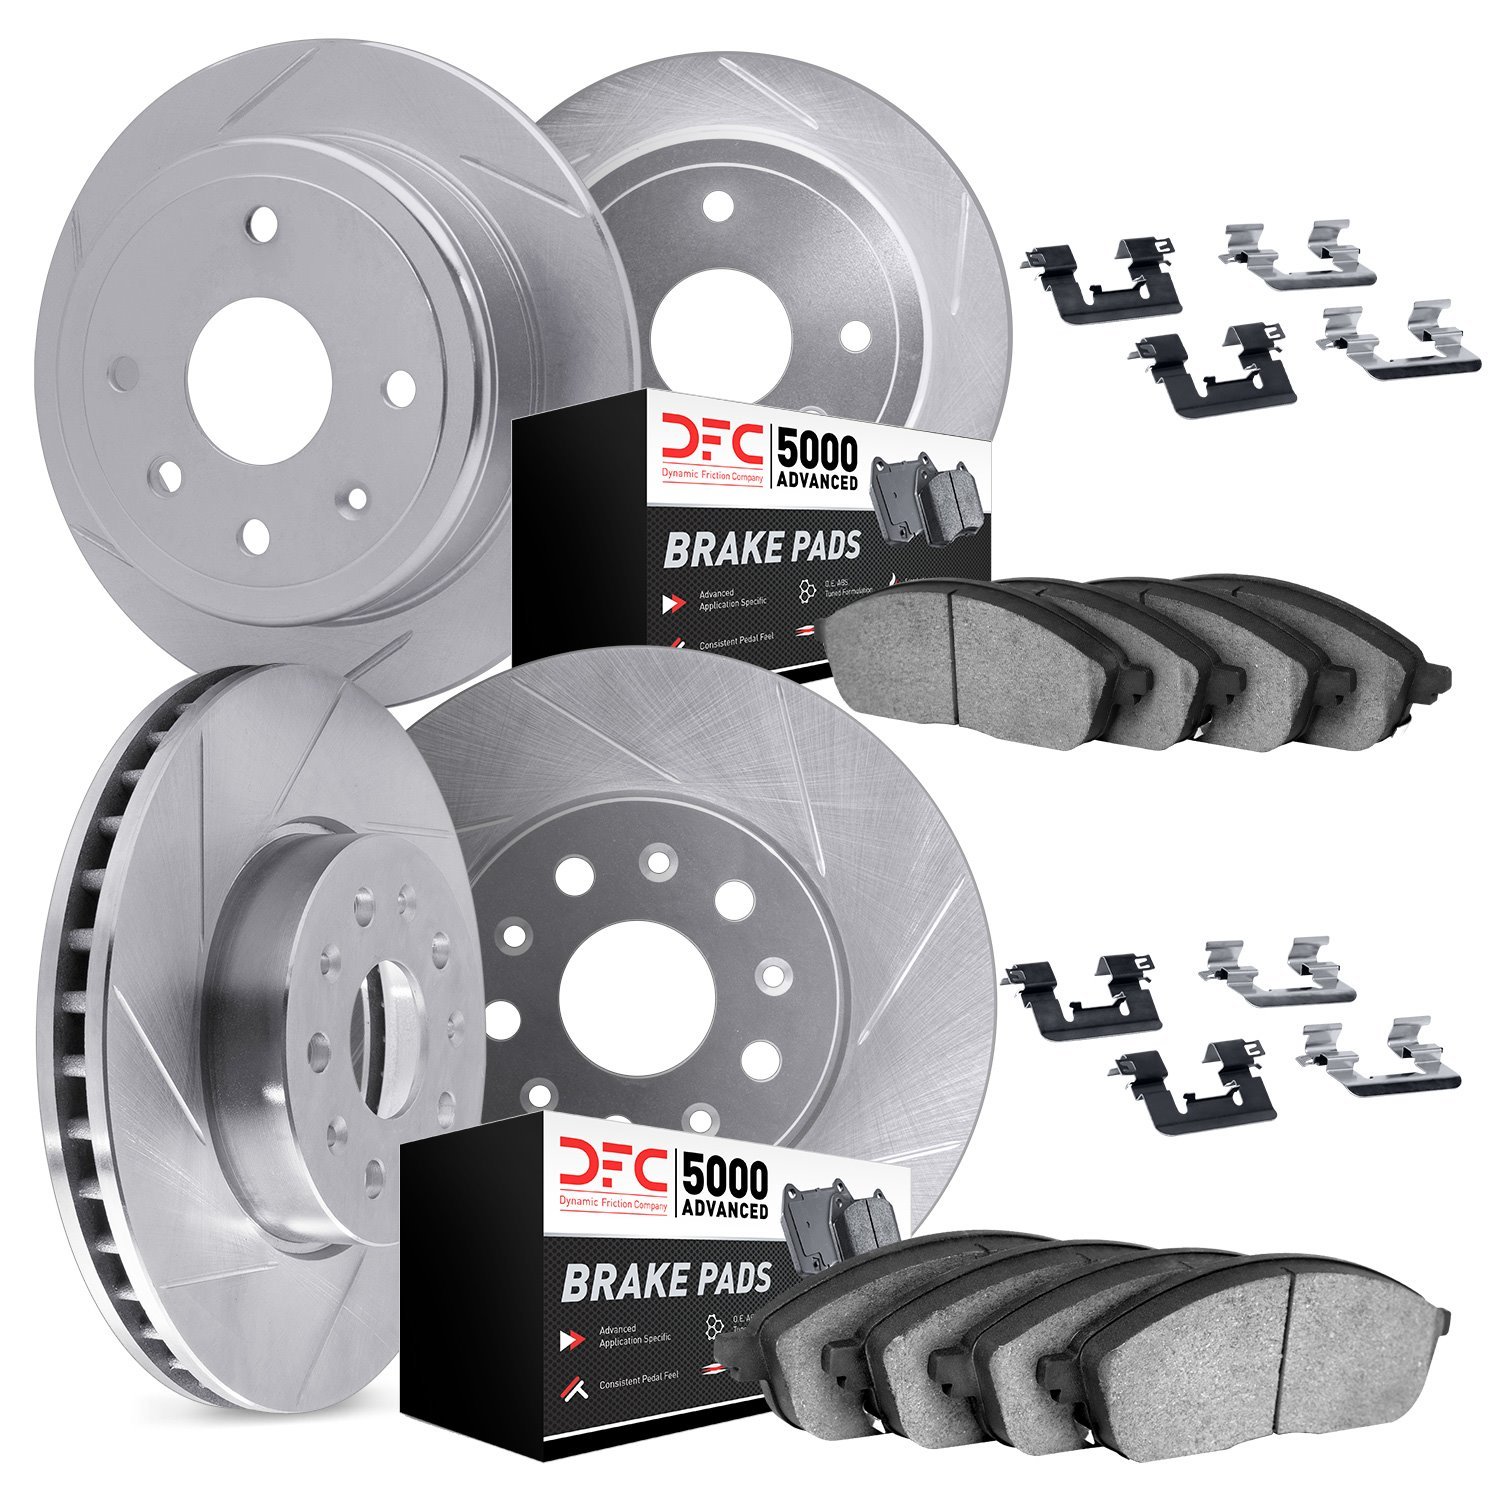 5514-59062 Slotted Brake Rotors w/5000 Advanced Brake Pads Kit & Hardware [Silver], 2007-2016 Acura/Honda, Position: Front and R